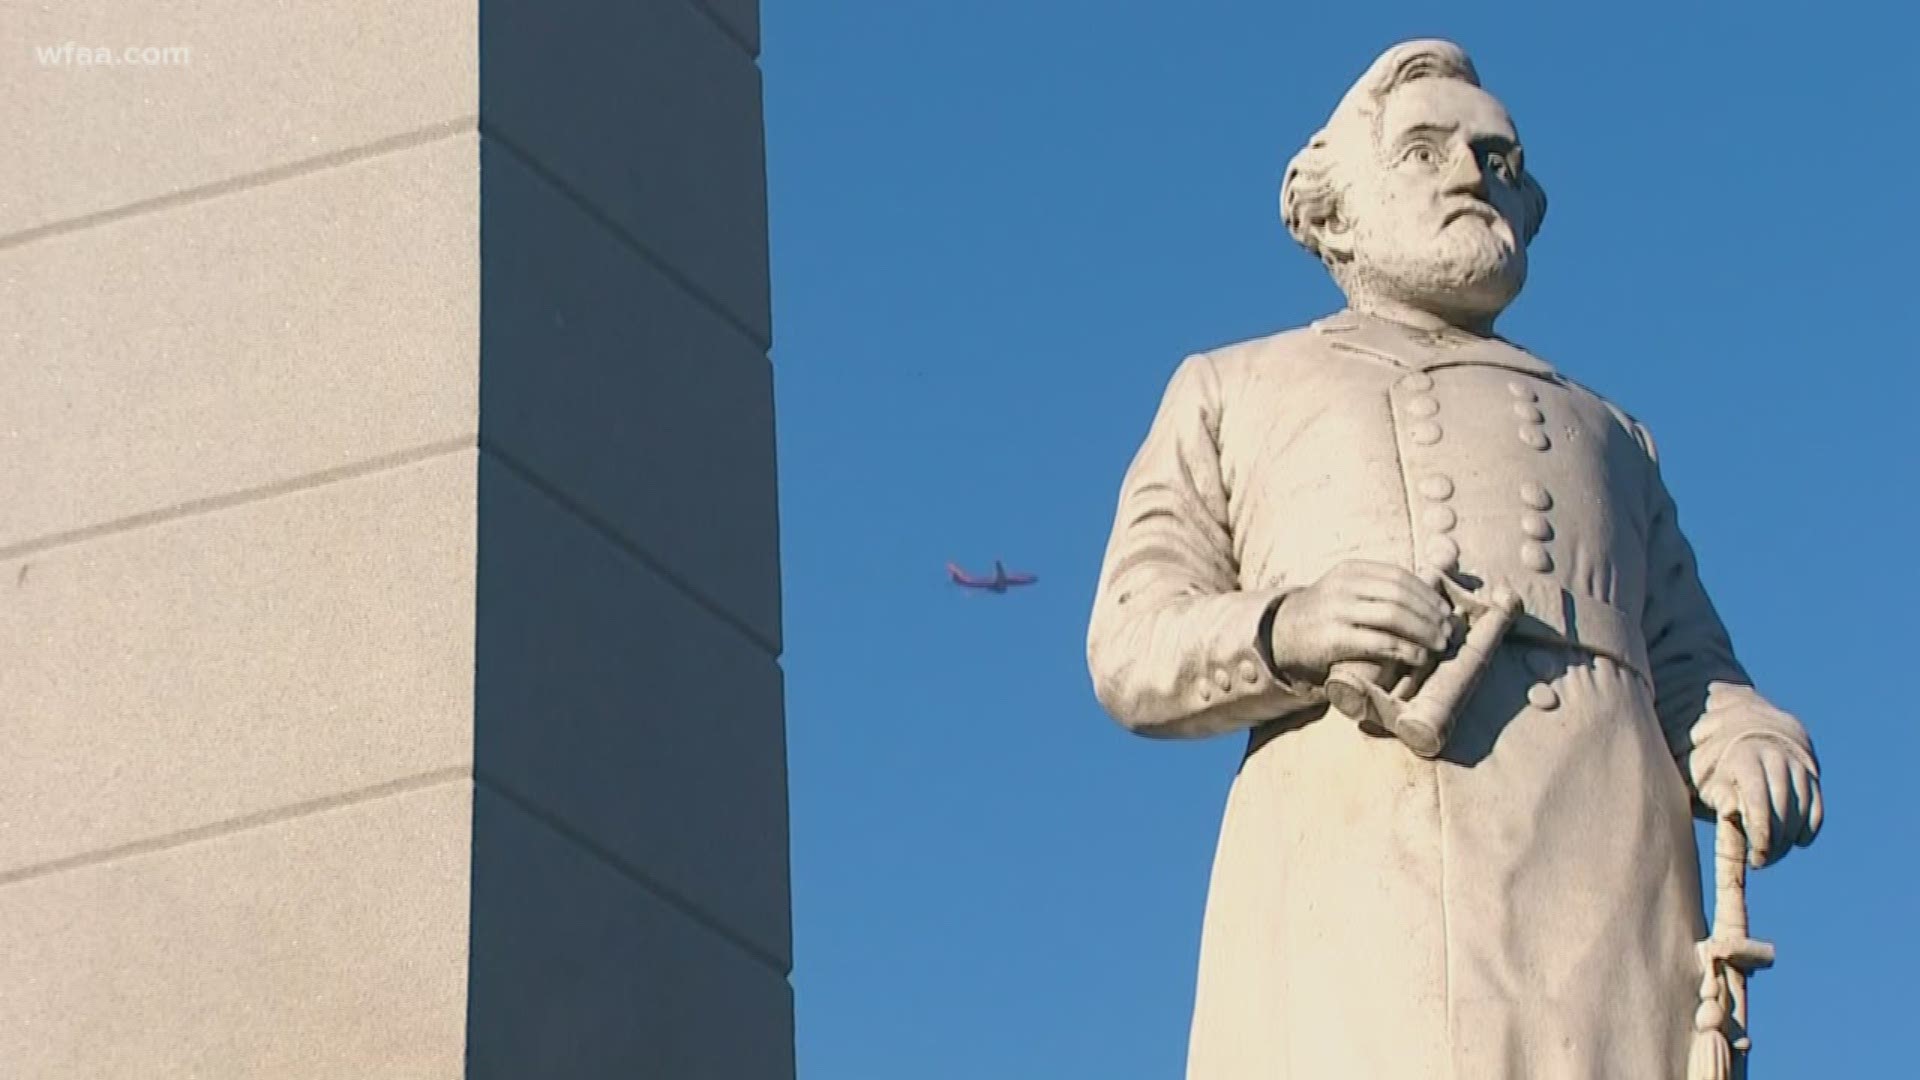 It's been 16 months since the removal of a Robert E. Lee statue in Dallas. Now the city is deciding the fate of another statue.